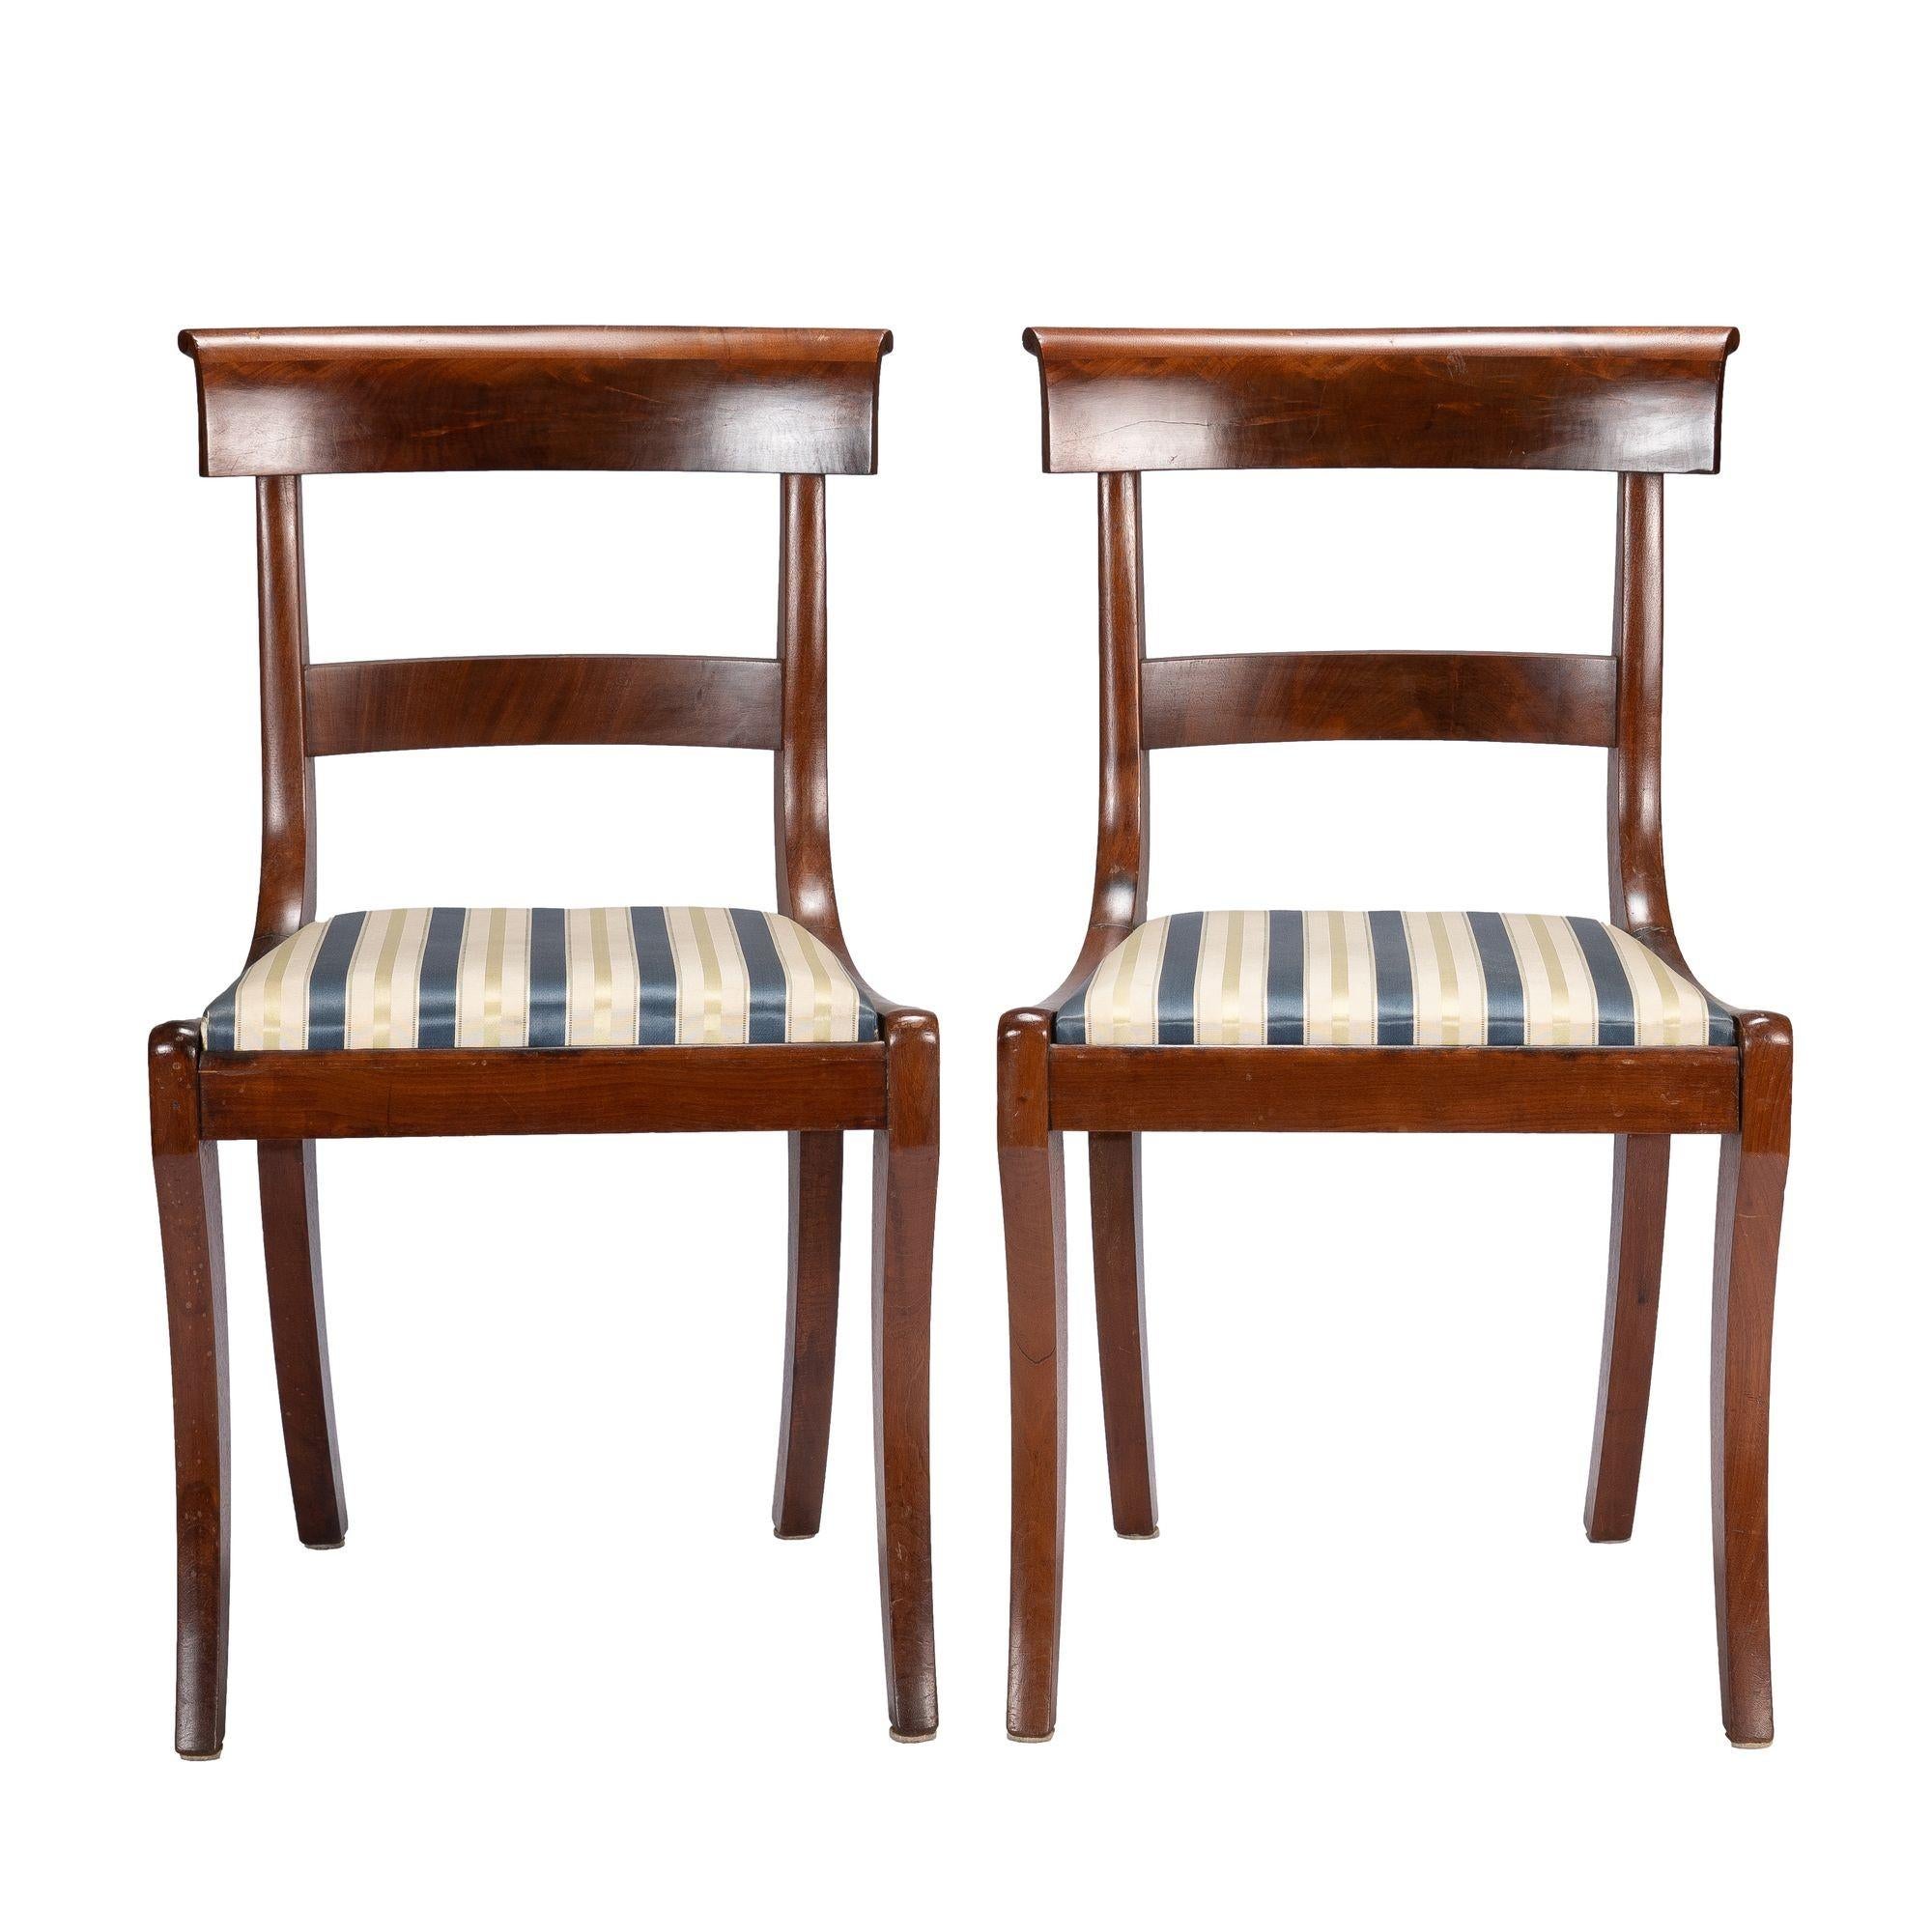 Pair of New York Klismos slip seat side chairs in mahogany and figured mahogany veneers. The chairs have a curved and figured veneer applied crest rail with scrolled edge over a curved and figured veneered horizontal back rail morticed between the